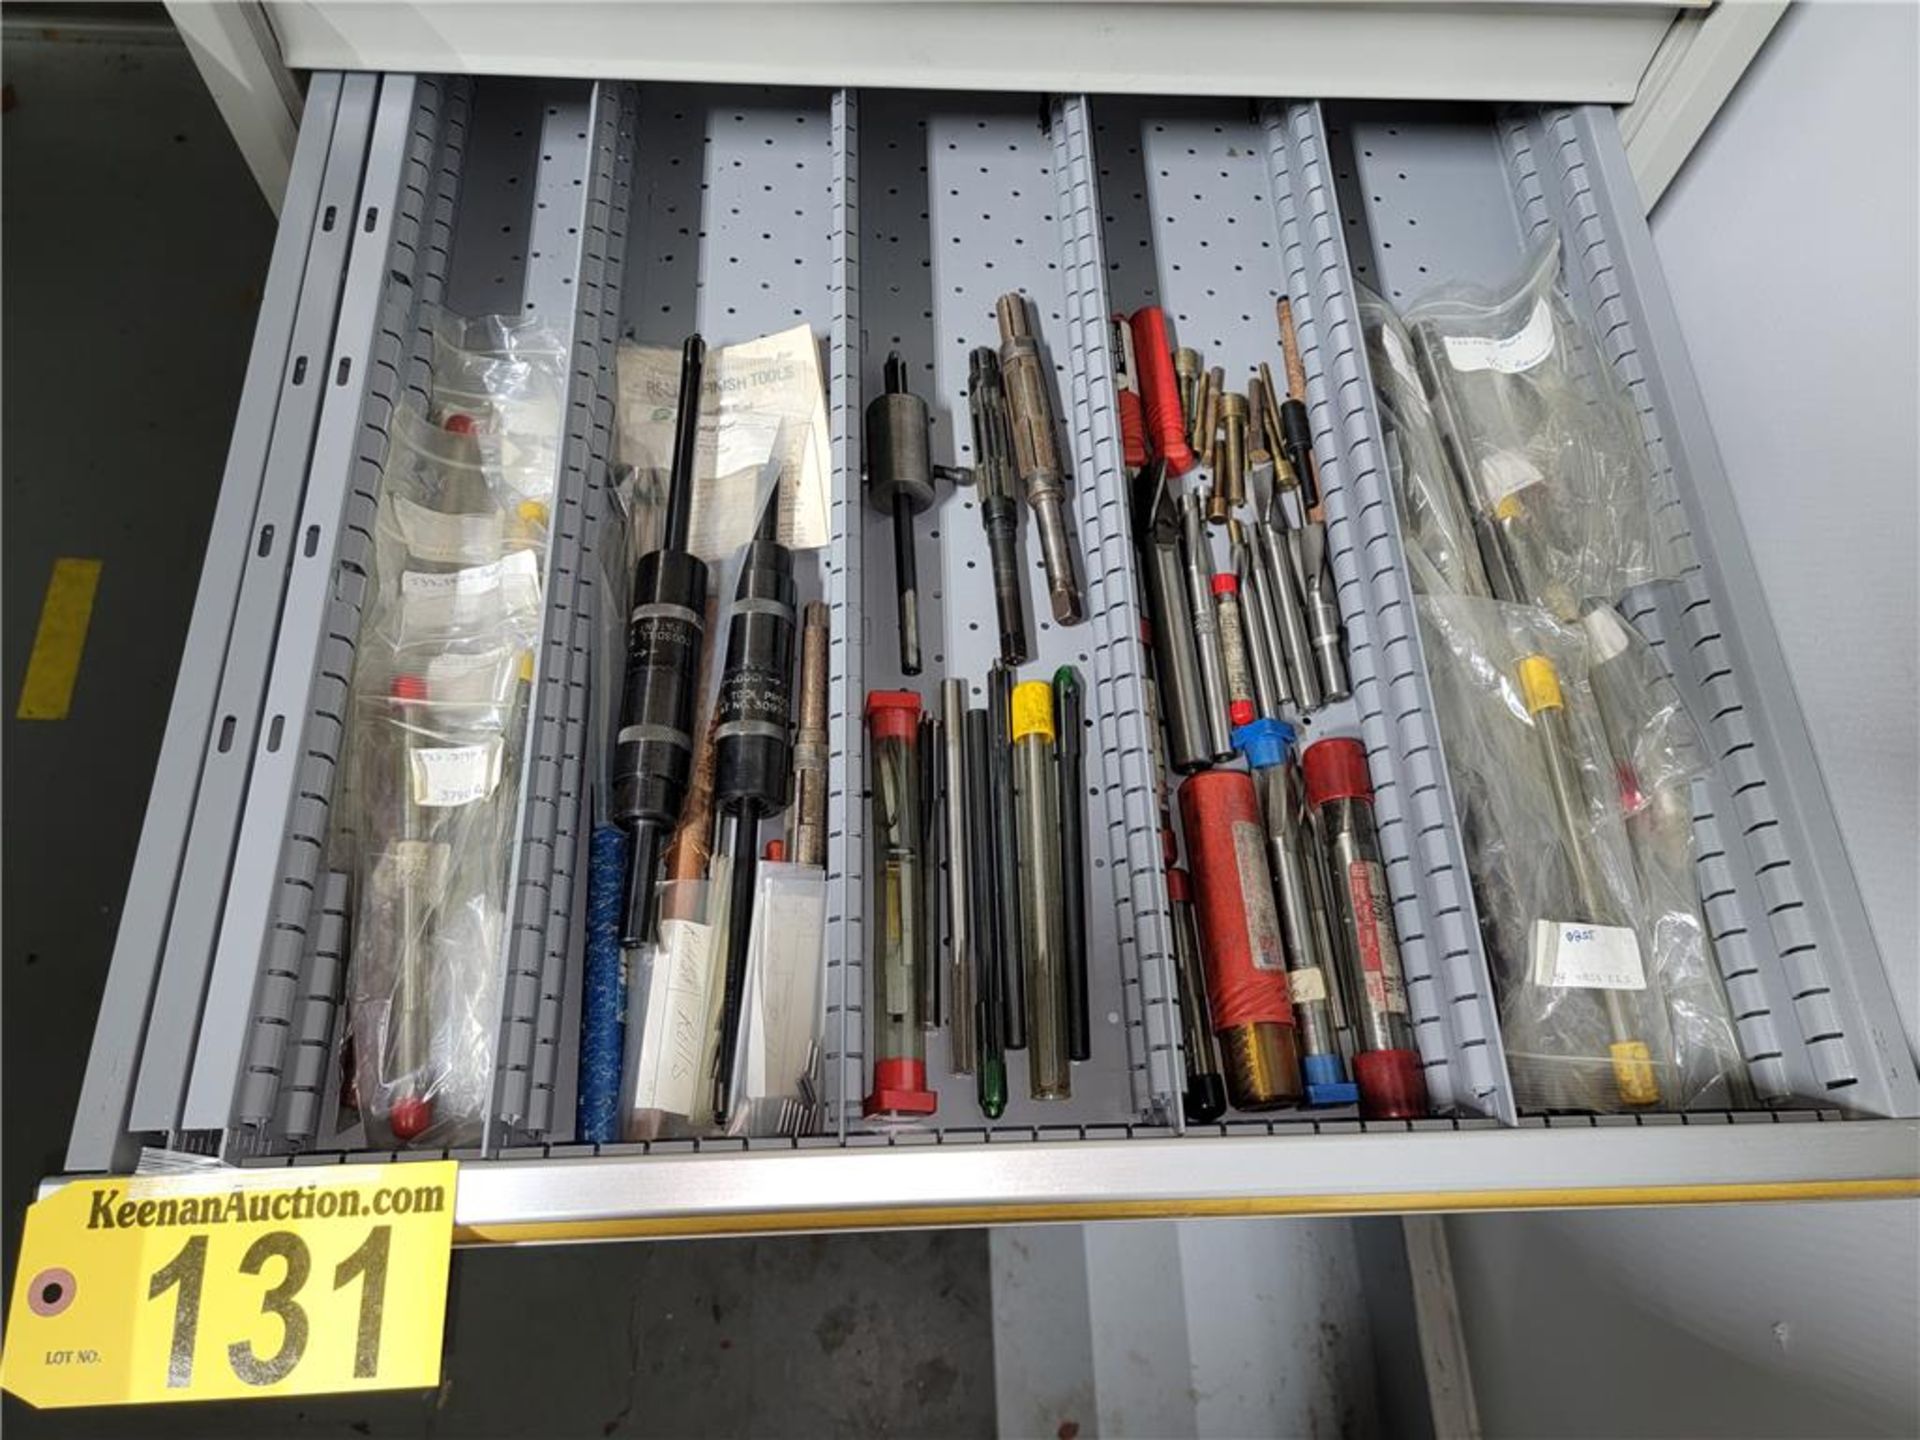 CONTENTS OF DRAWER: ASSORTED REAMERS 3/8-1/2, COUNTER BORES, COGSDRILL ROLL-A-FINISH TOOLS, MISC.